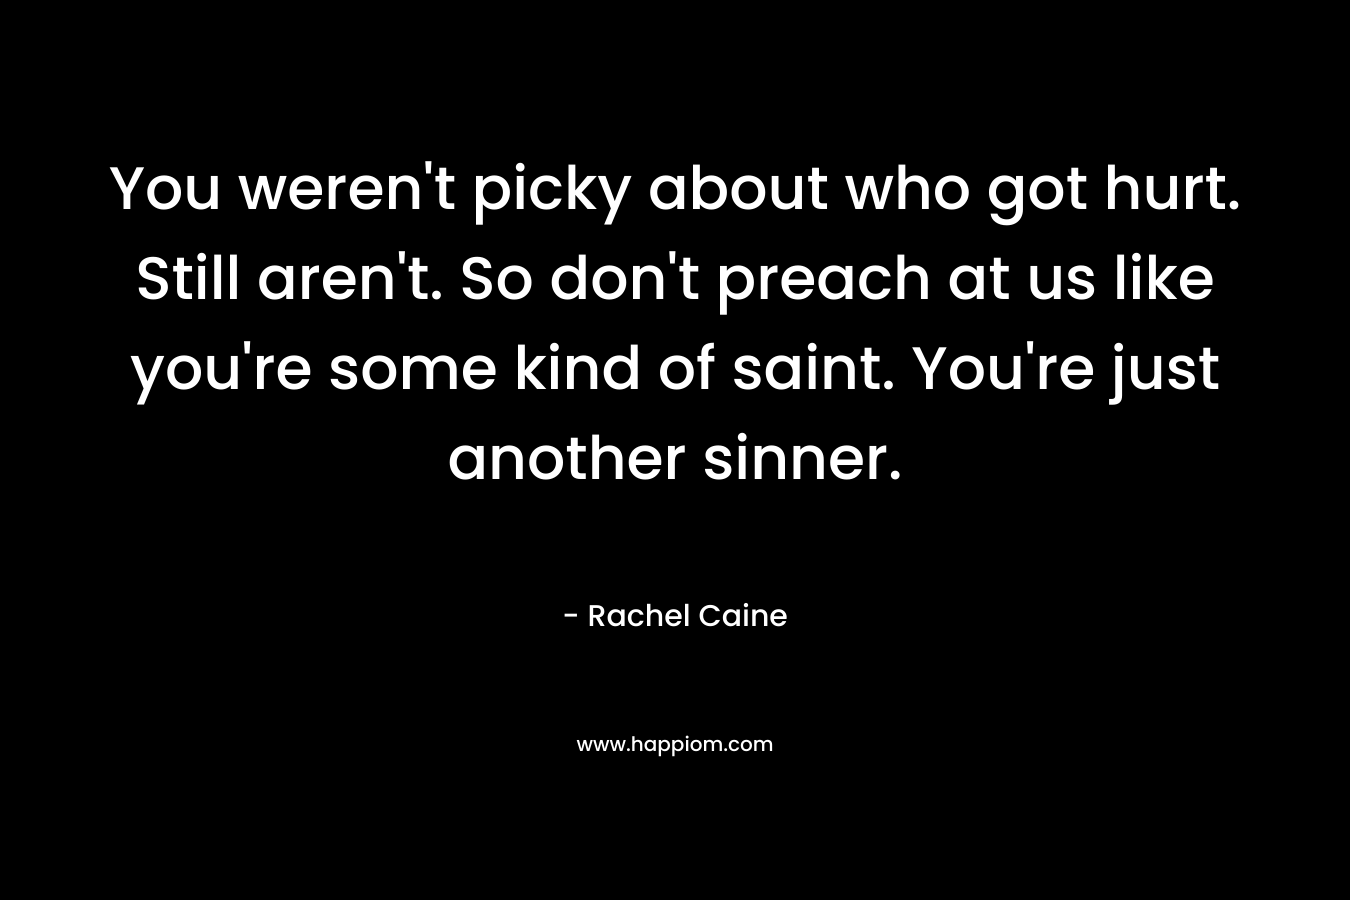 You weren't picky about who got hurt. Still aren't. So don't preach at us like you're some kind of saint. You're just another sinner.